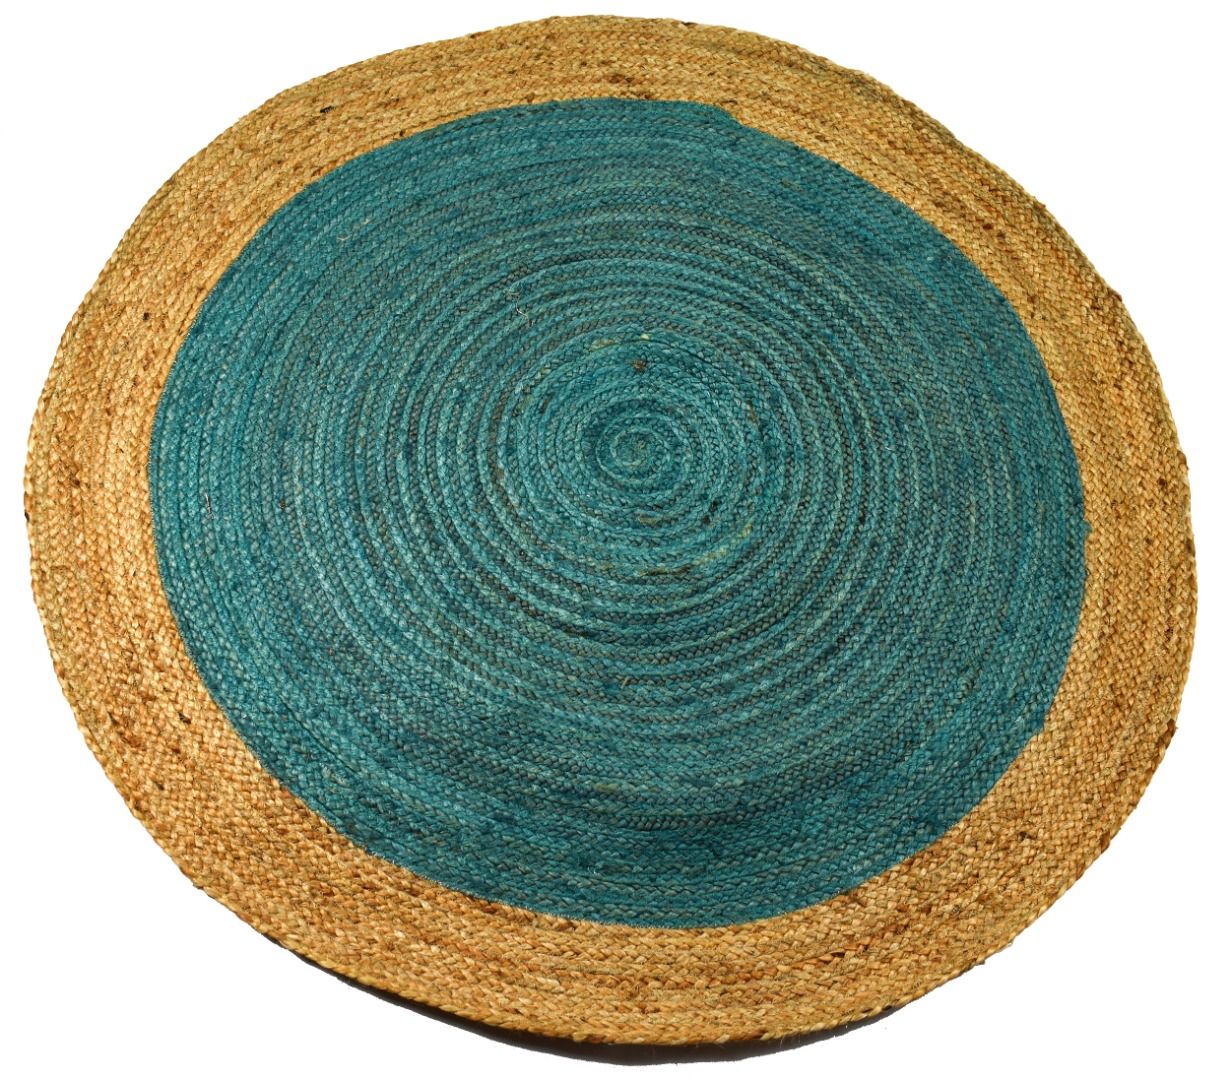 Turquoise Coloured Jute Round Rug With Natural Border | Ebay Pertaining To Border Round Rugs (View 9 of 15)